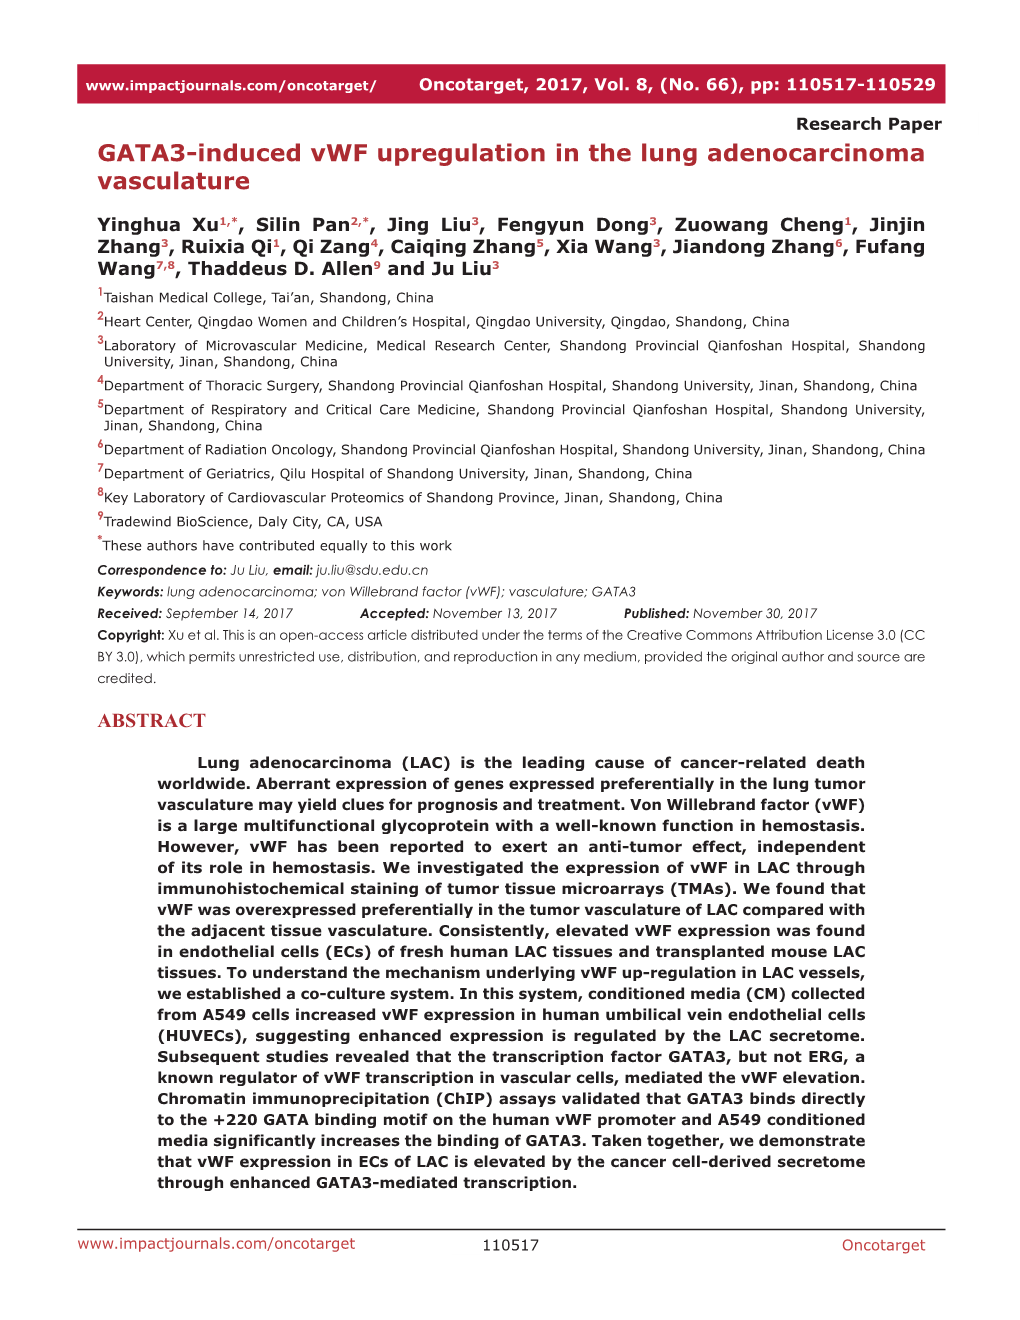 GATA3-Induced Vwf Upregulation in the Lung Adenocarcinoma Vasculature